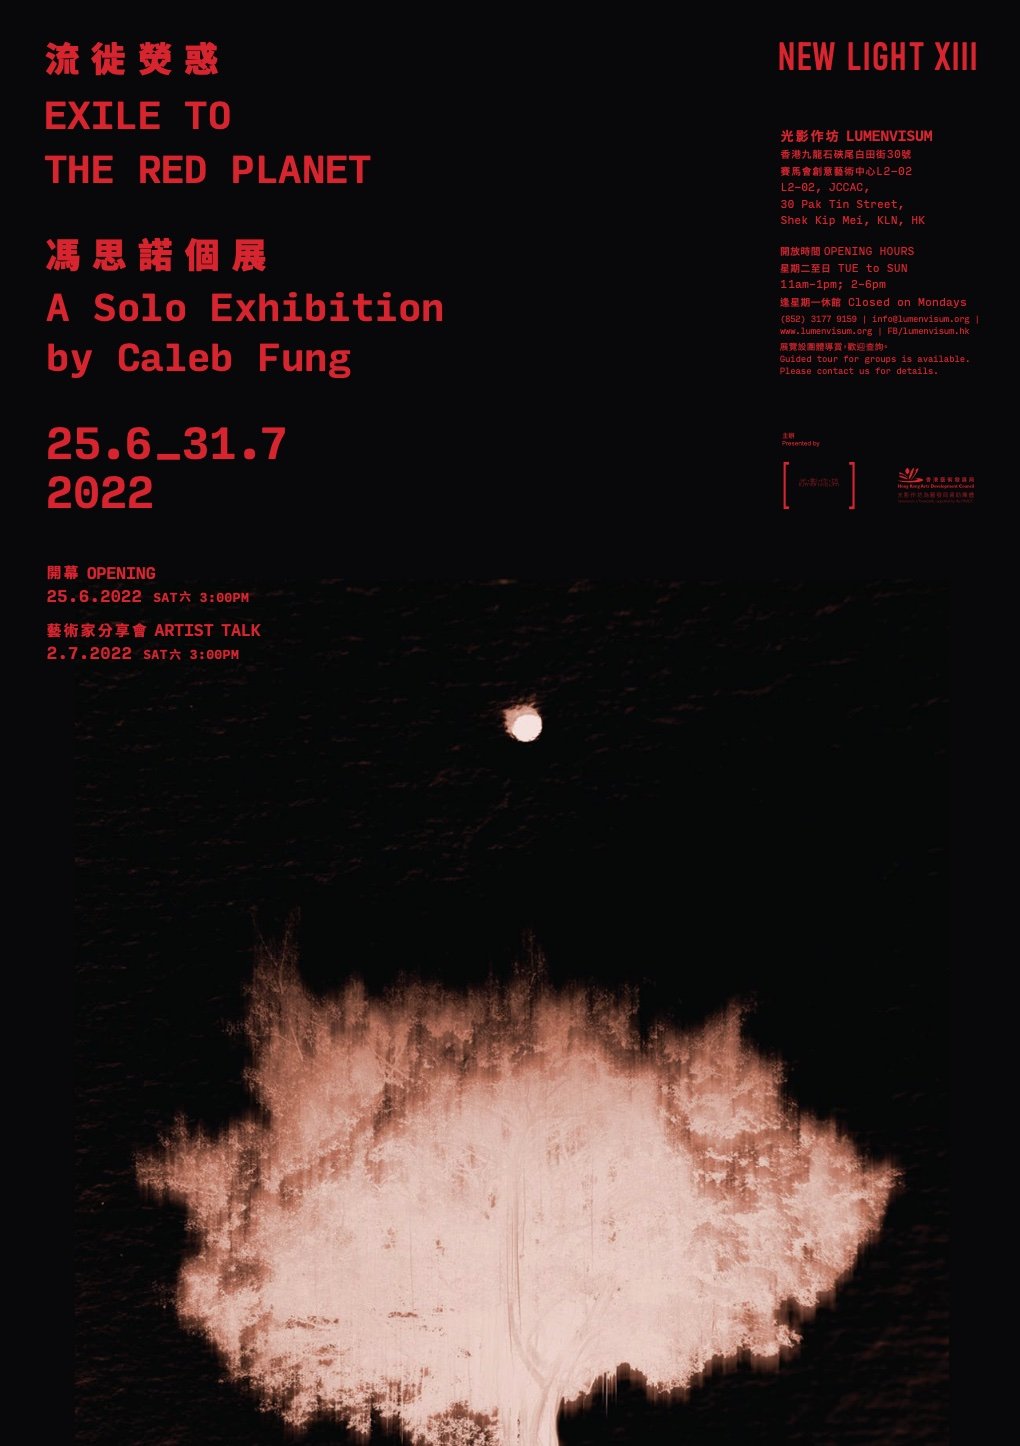 Poster of the exhibition in 2022, Lumenvisum, Hong Kong.